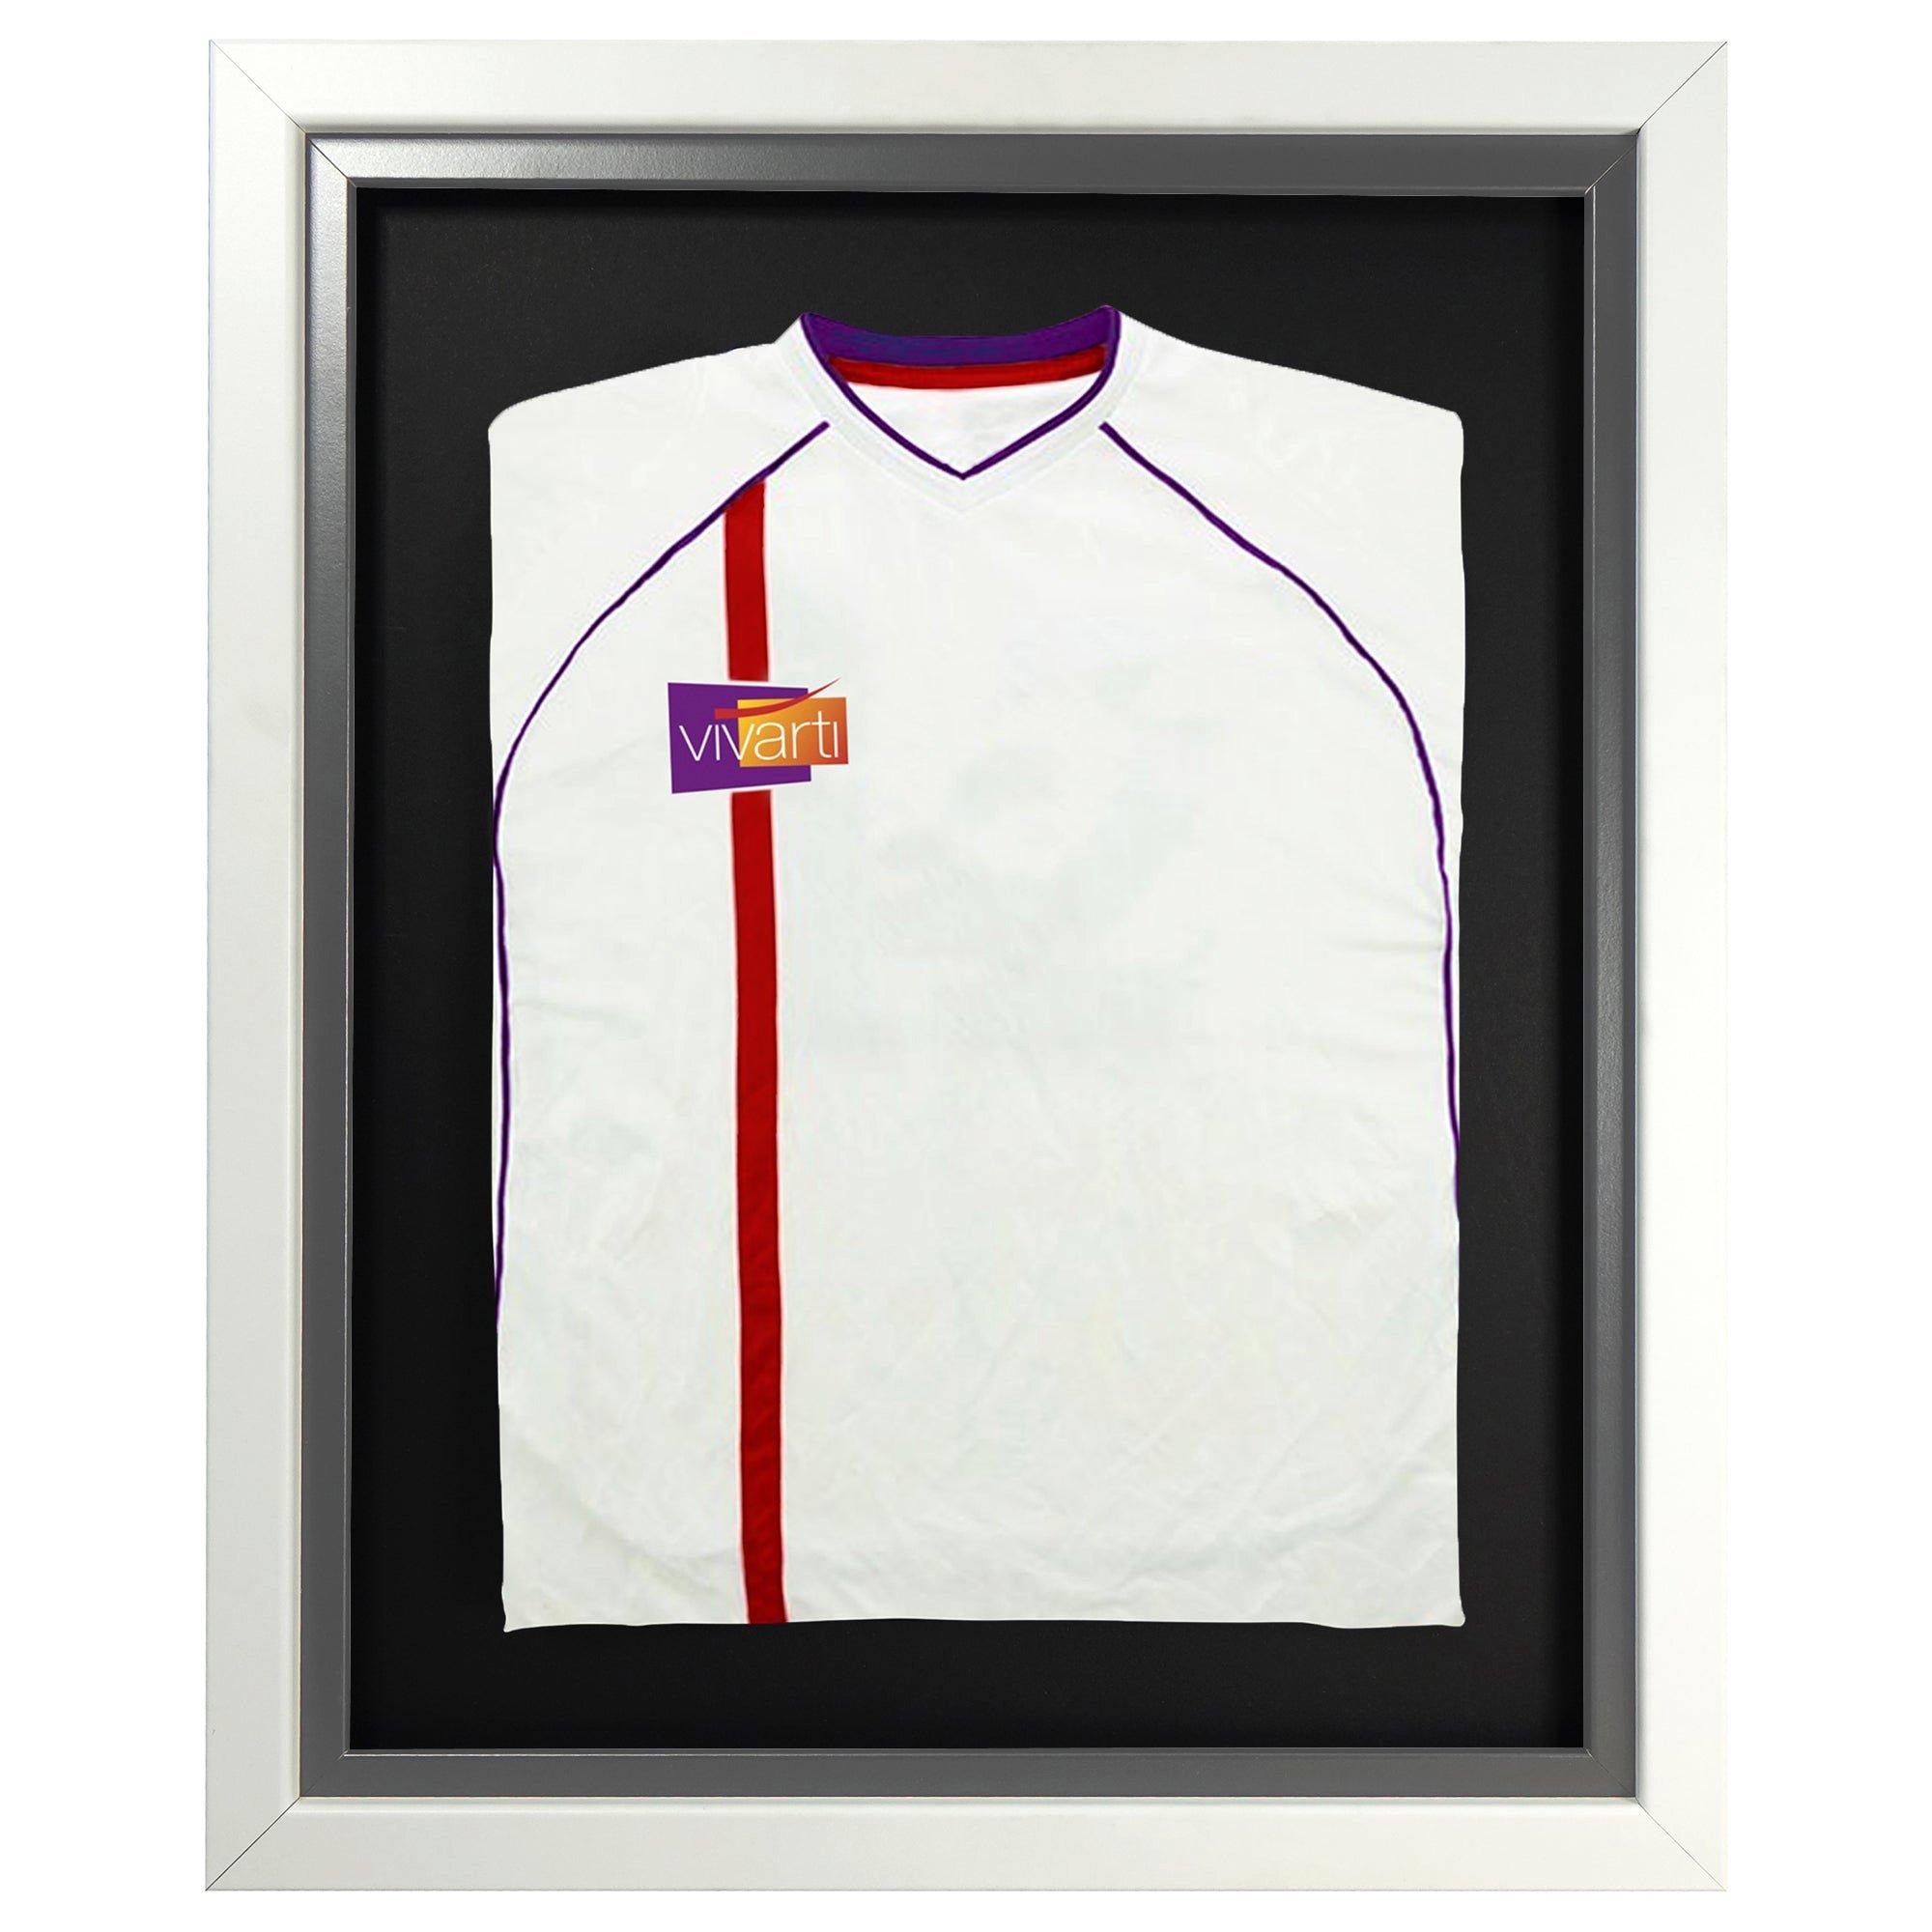 Infant Standard Mounted Sports Shirt Display Frame with Gloss White Frame and Silver Inner Frame 40 